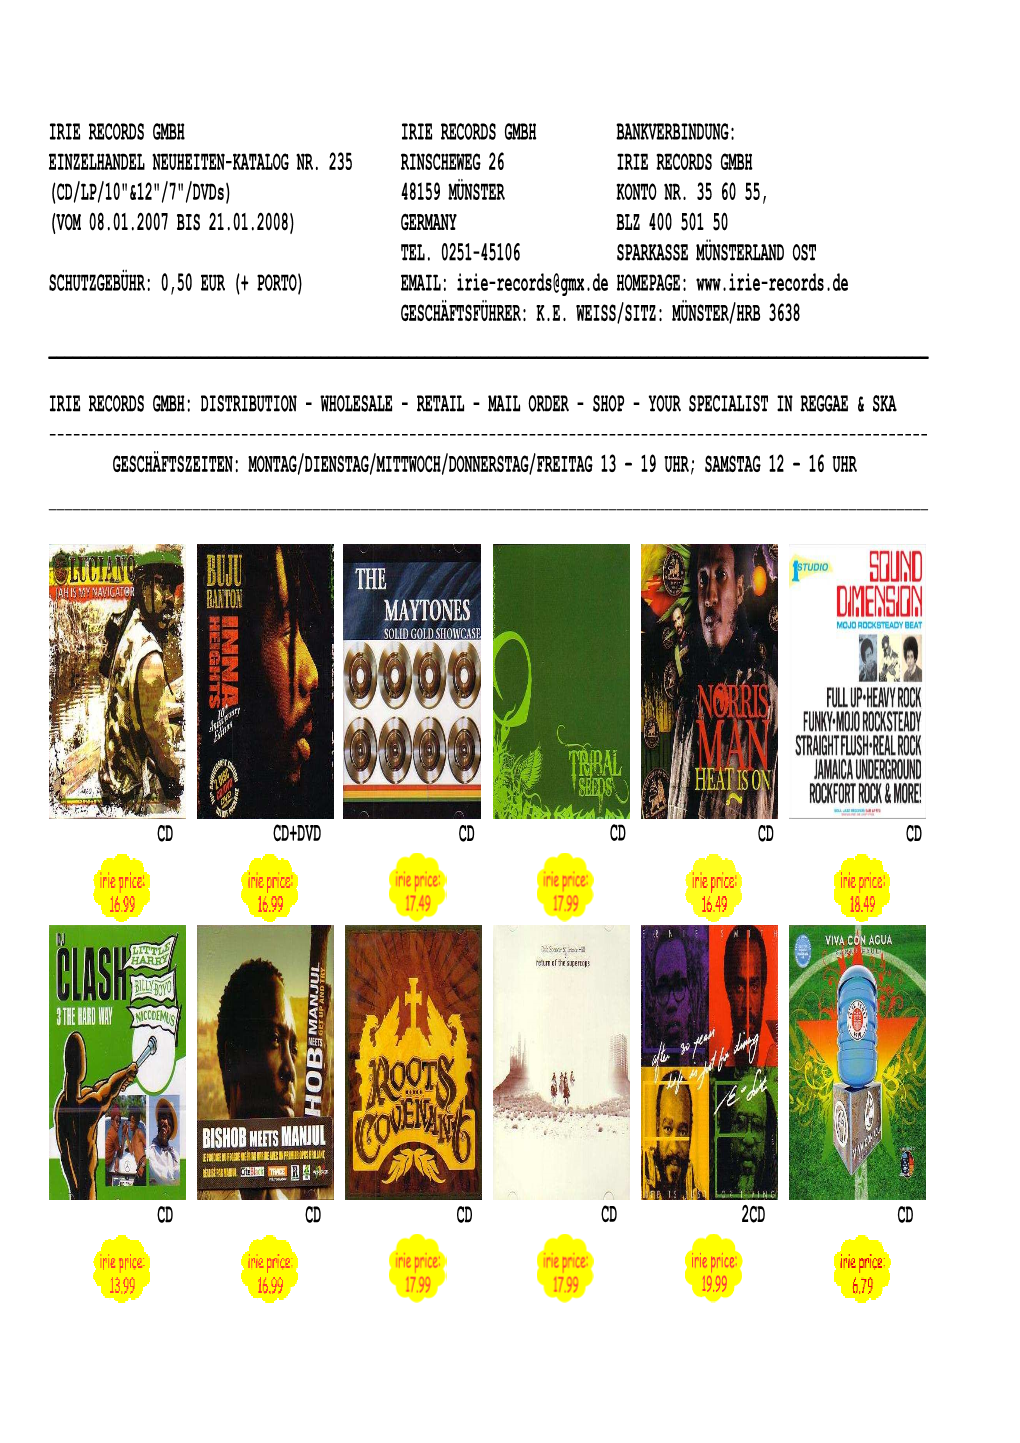 IRIE RECORDS New Release Catalogue 01-08 #2